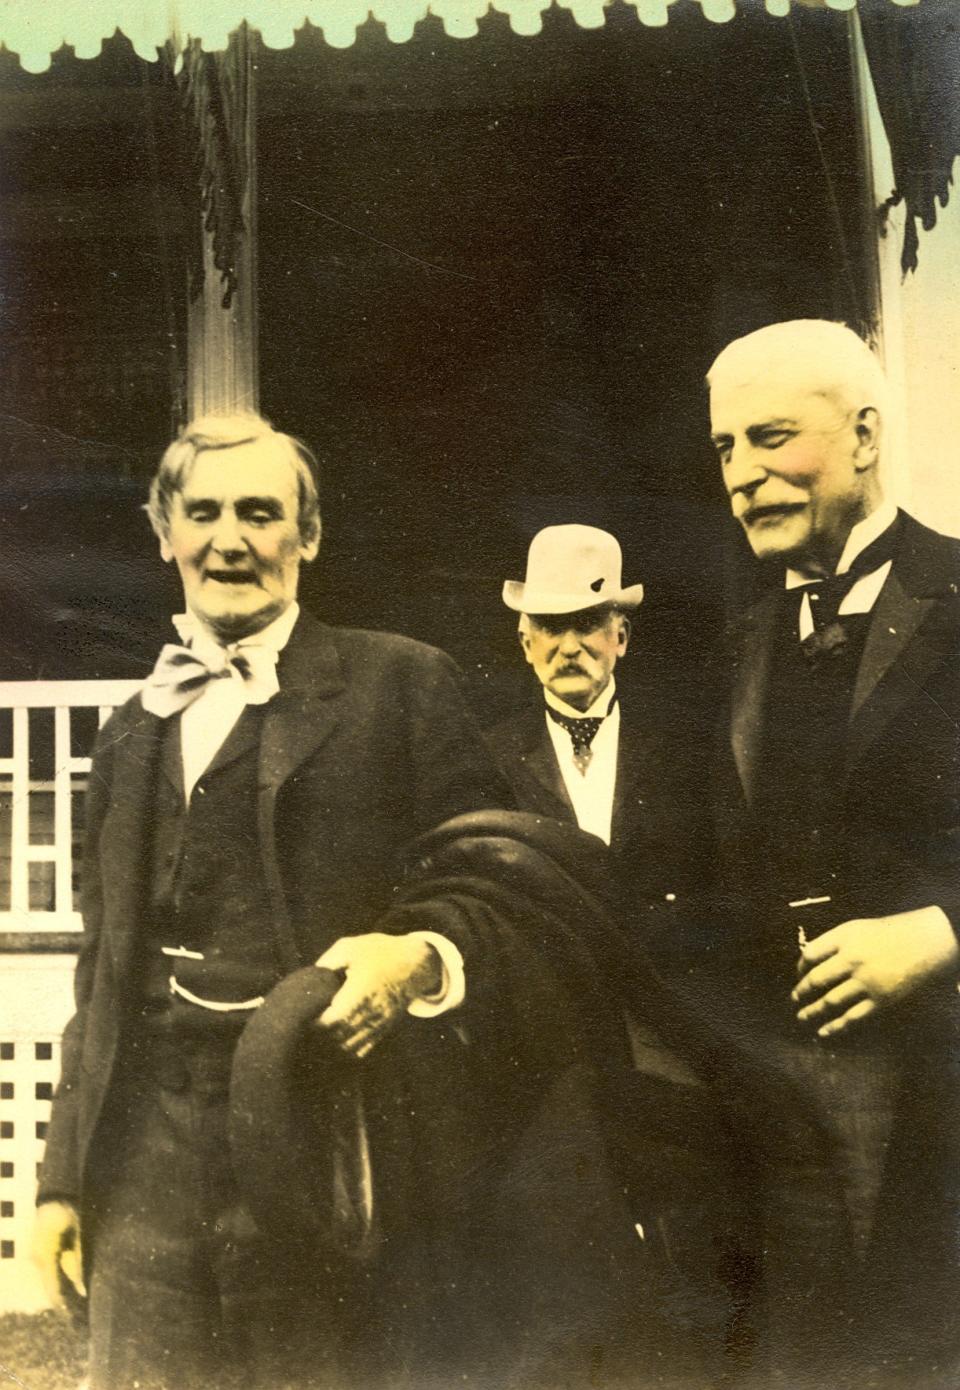 Joseph Jefferson and friends Chauncey Depew and Henry Flagler in Palm Beach.